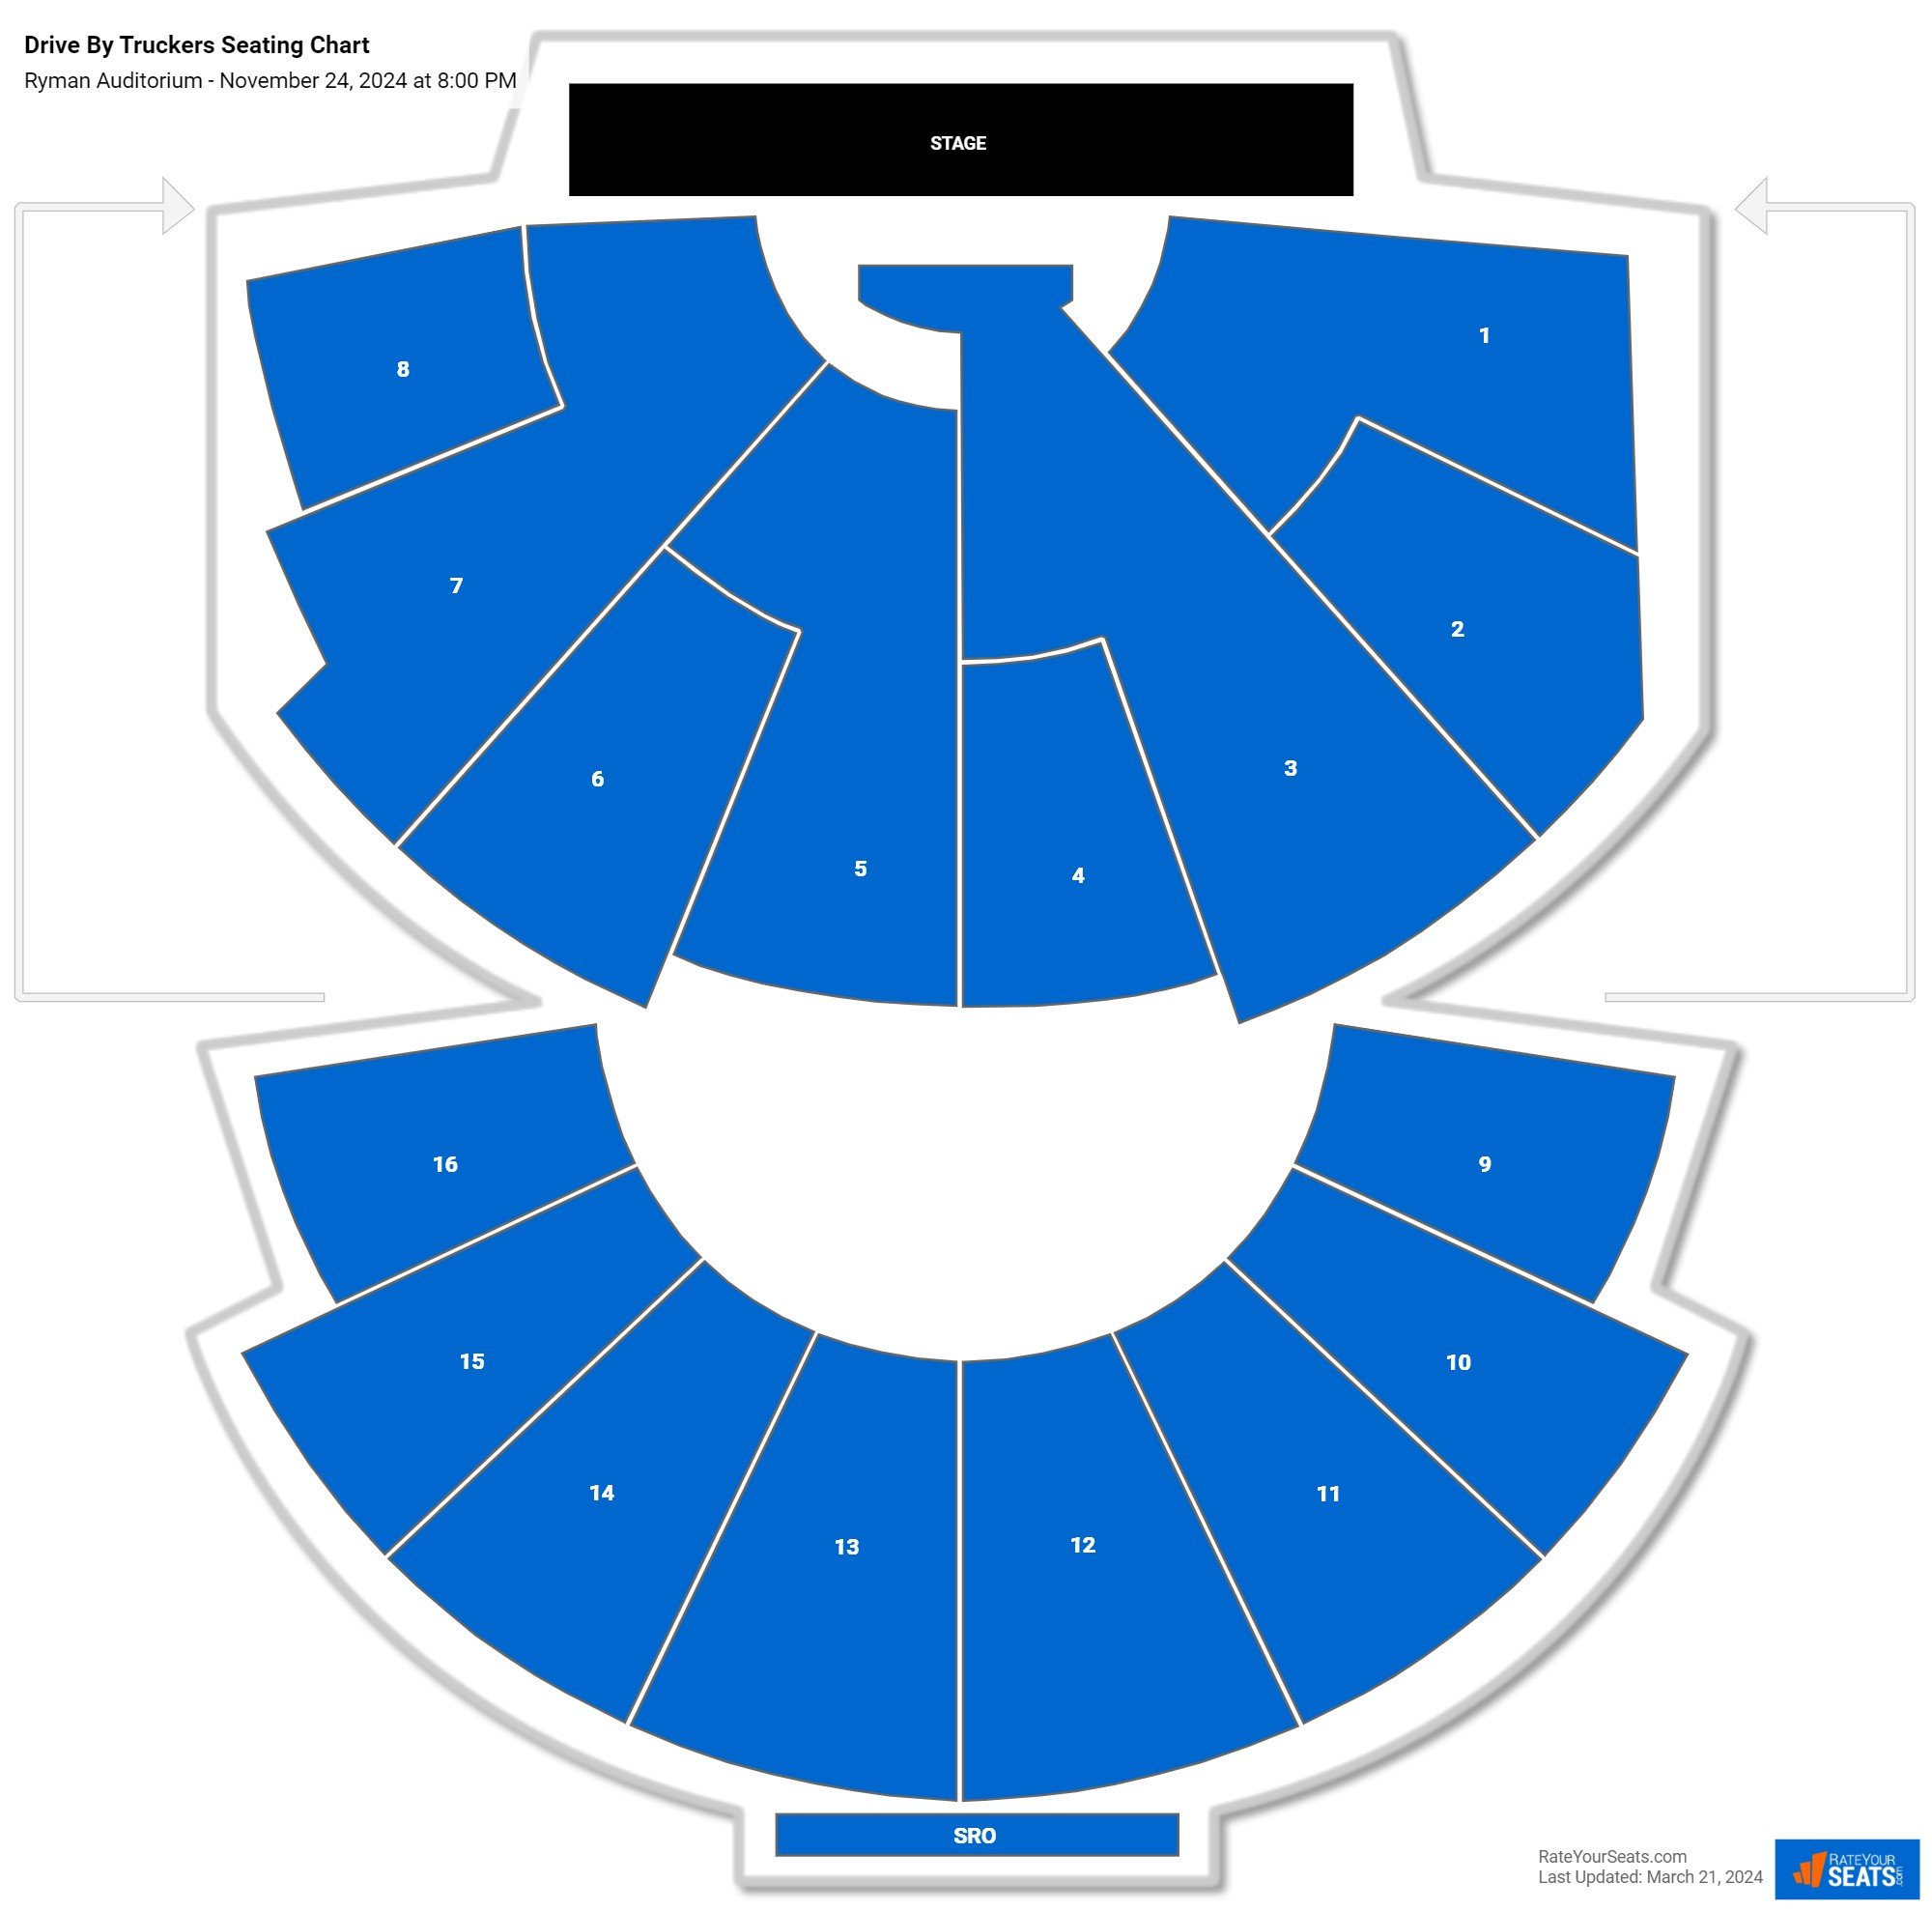 Drive By Truckers seating chart Ryman Auditorium